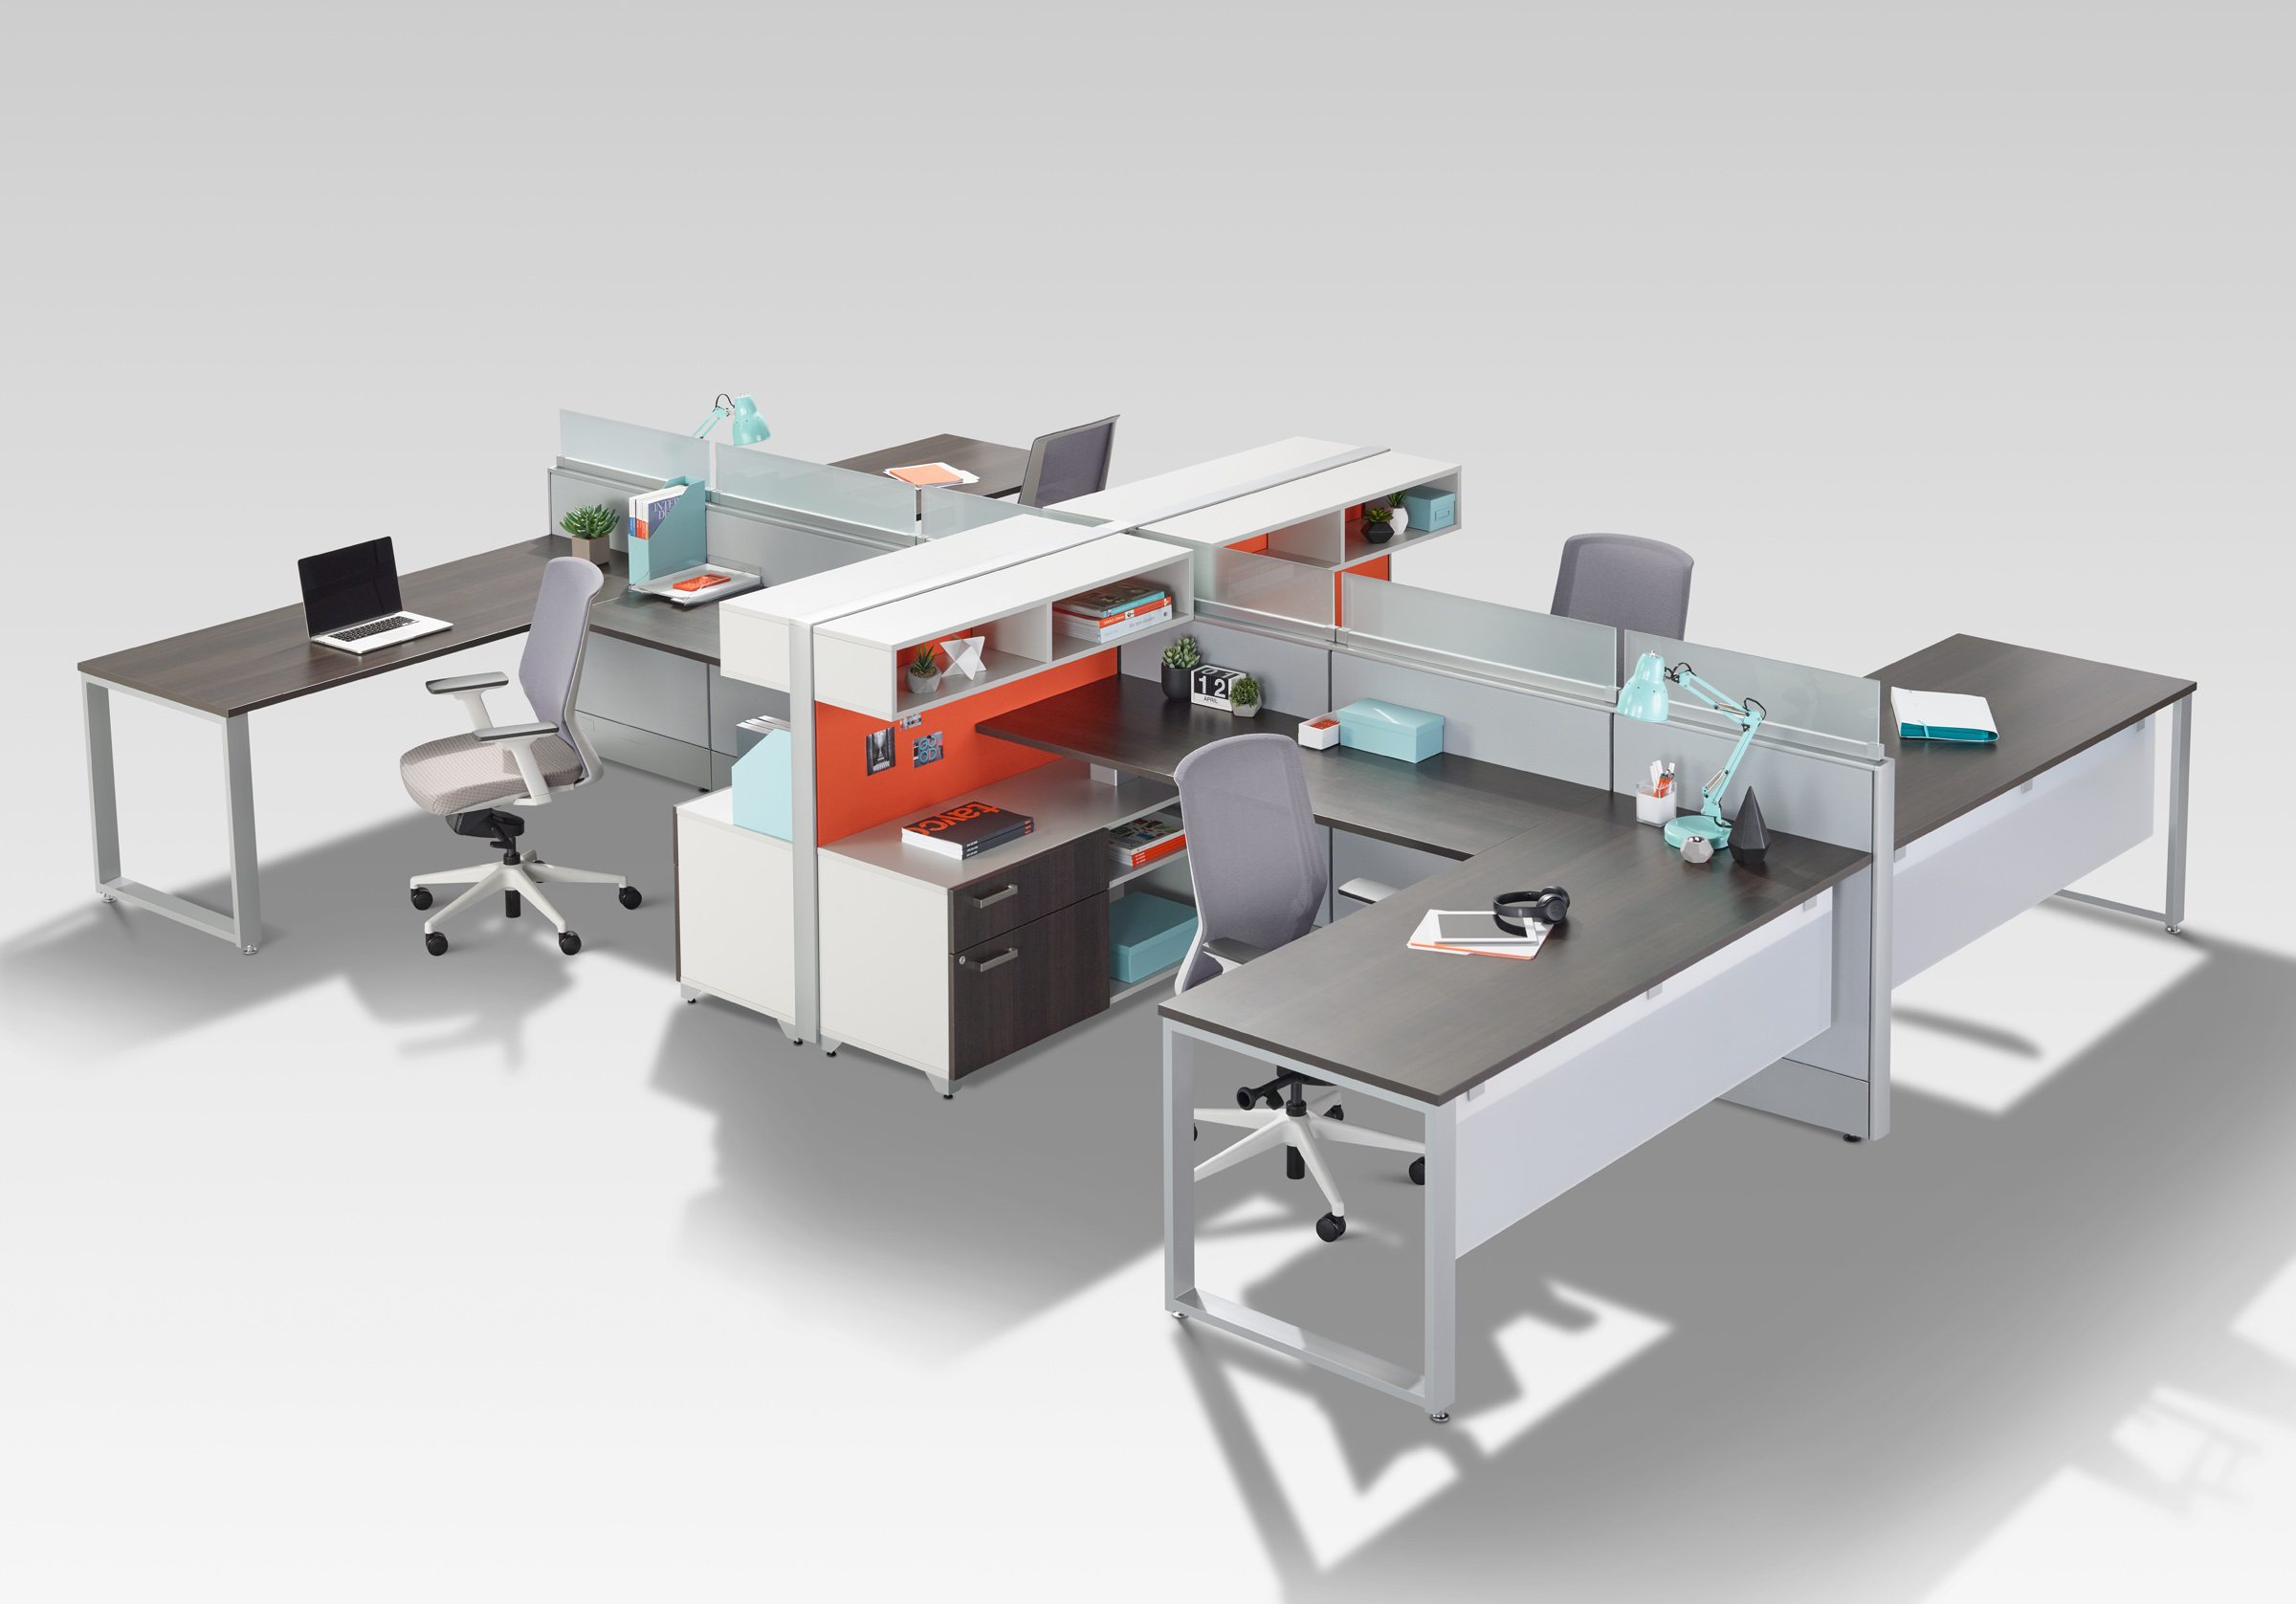 Contract Design : Adaptable and Collaborative Work Environment